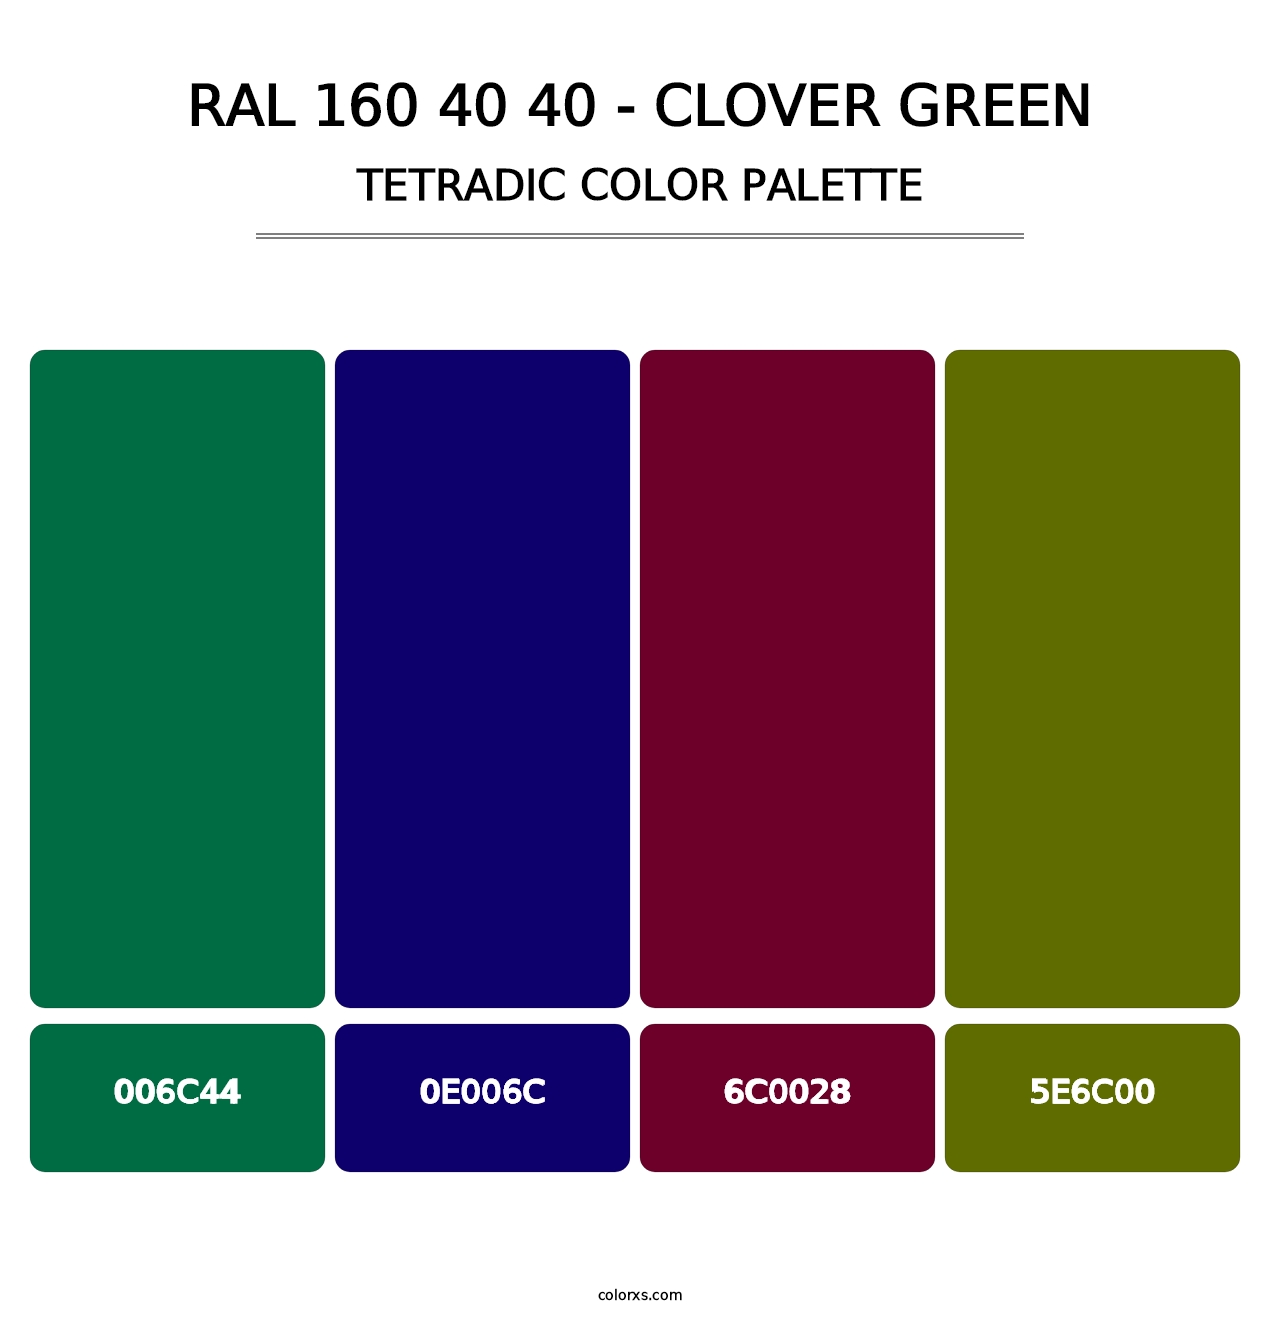 RAL 160 40 40 - Clover Green - Tetradic Color Palette